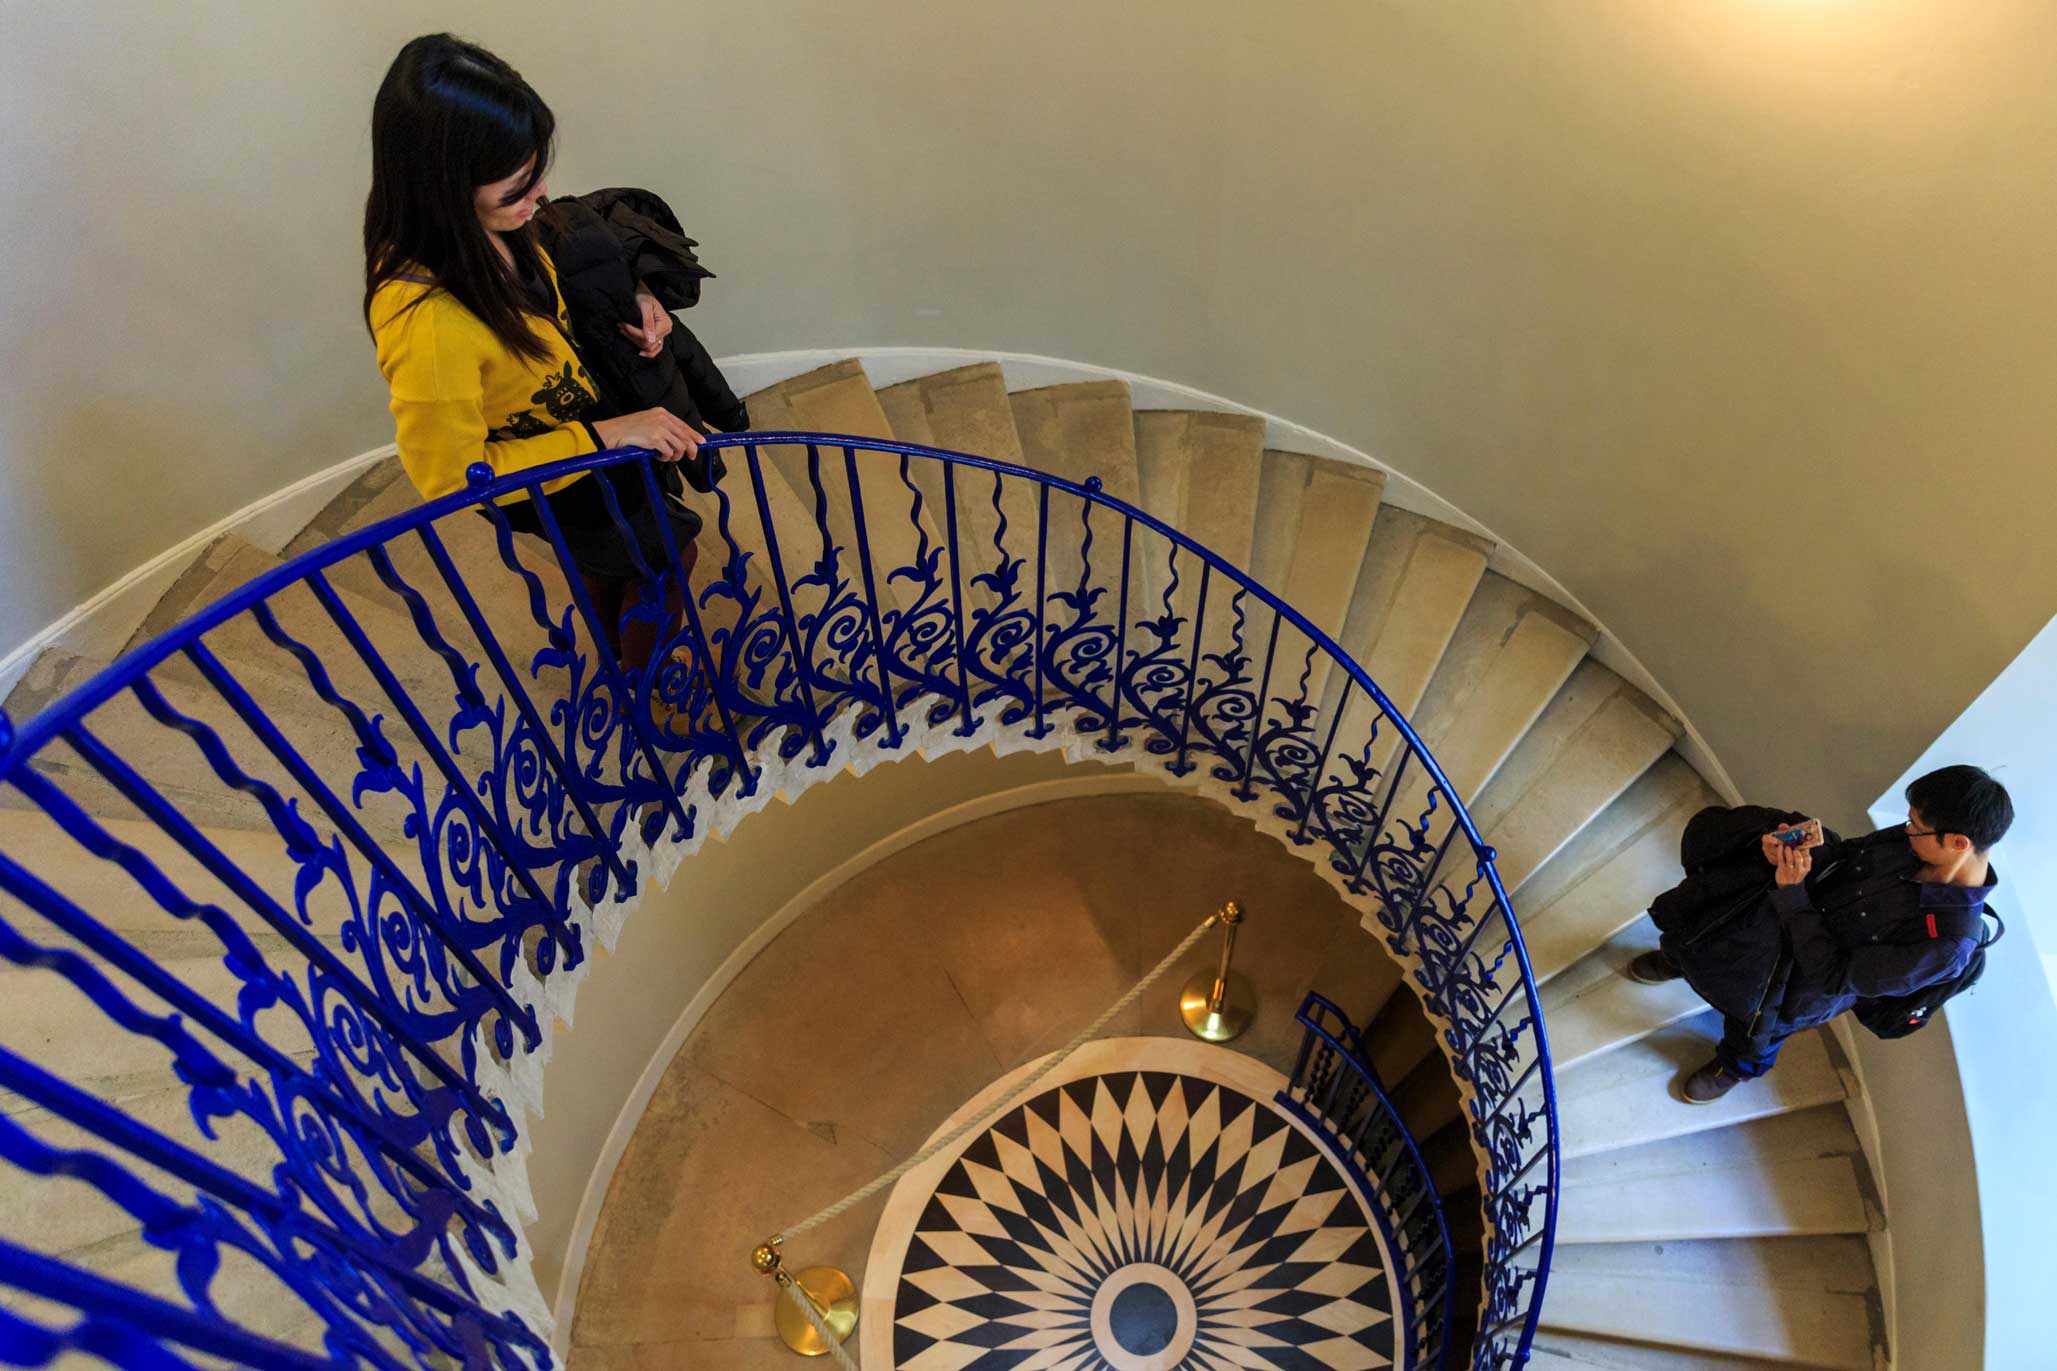 Two people standing on a metal spiral staircase.